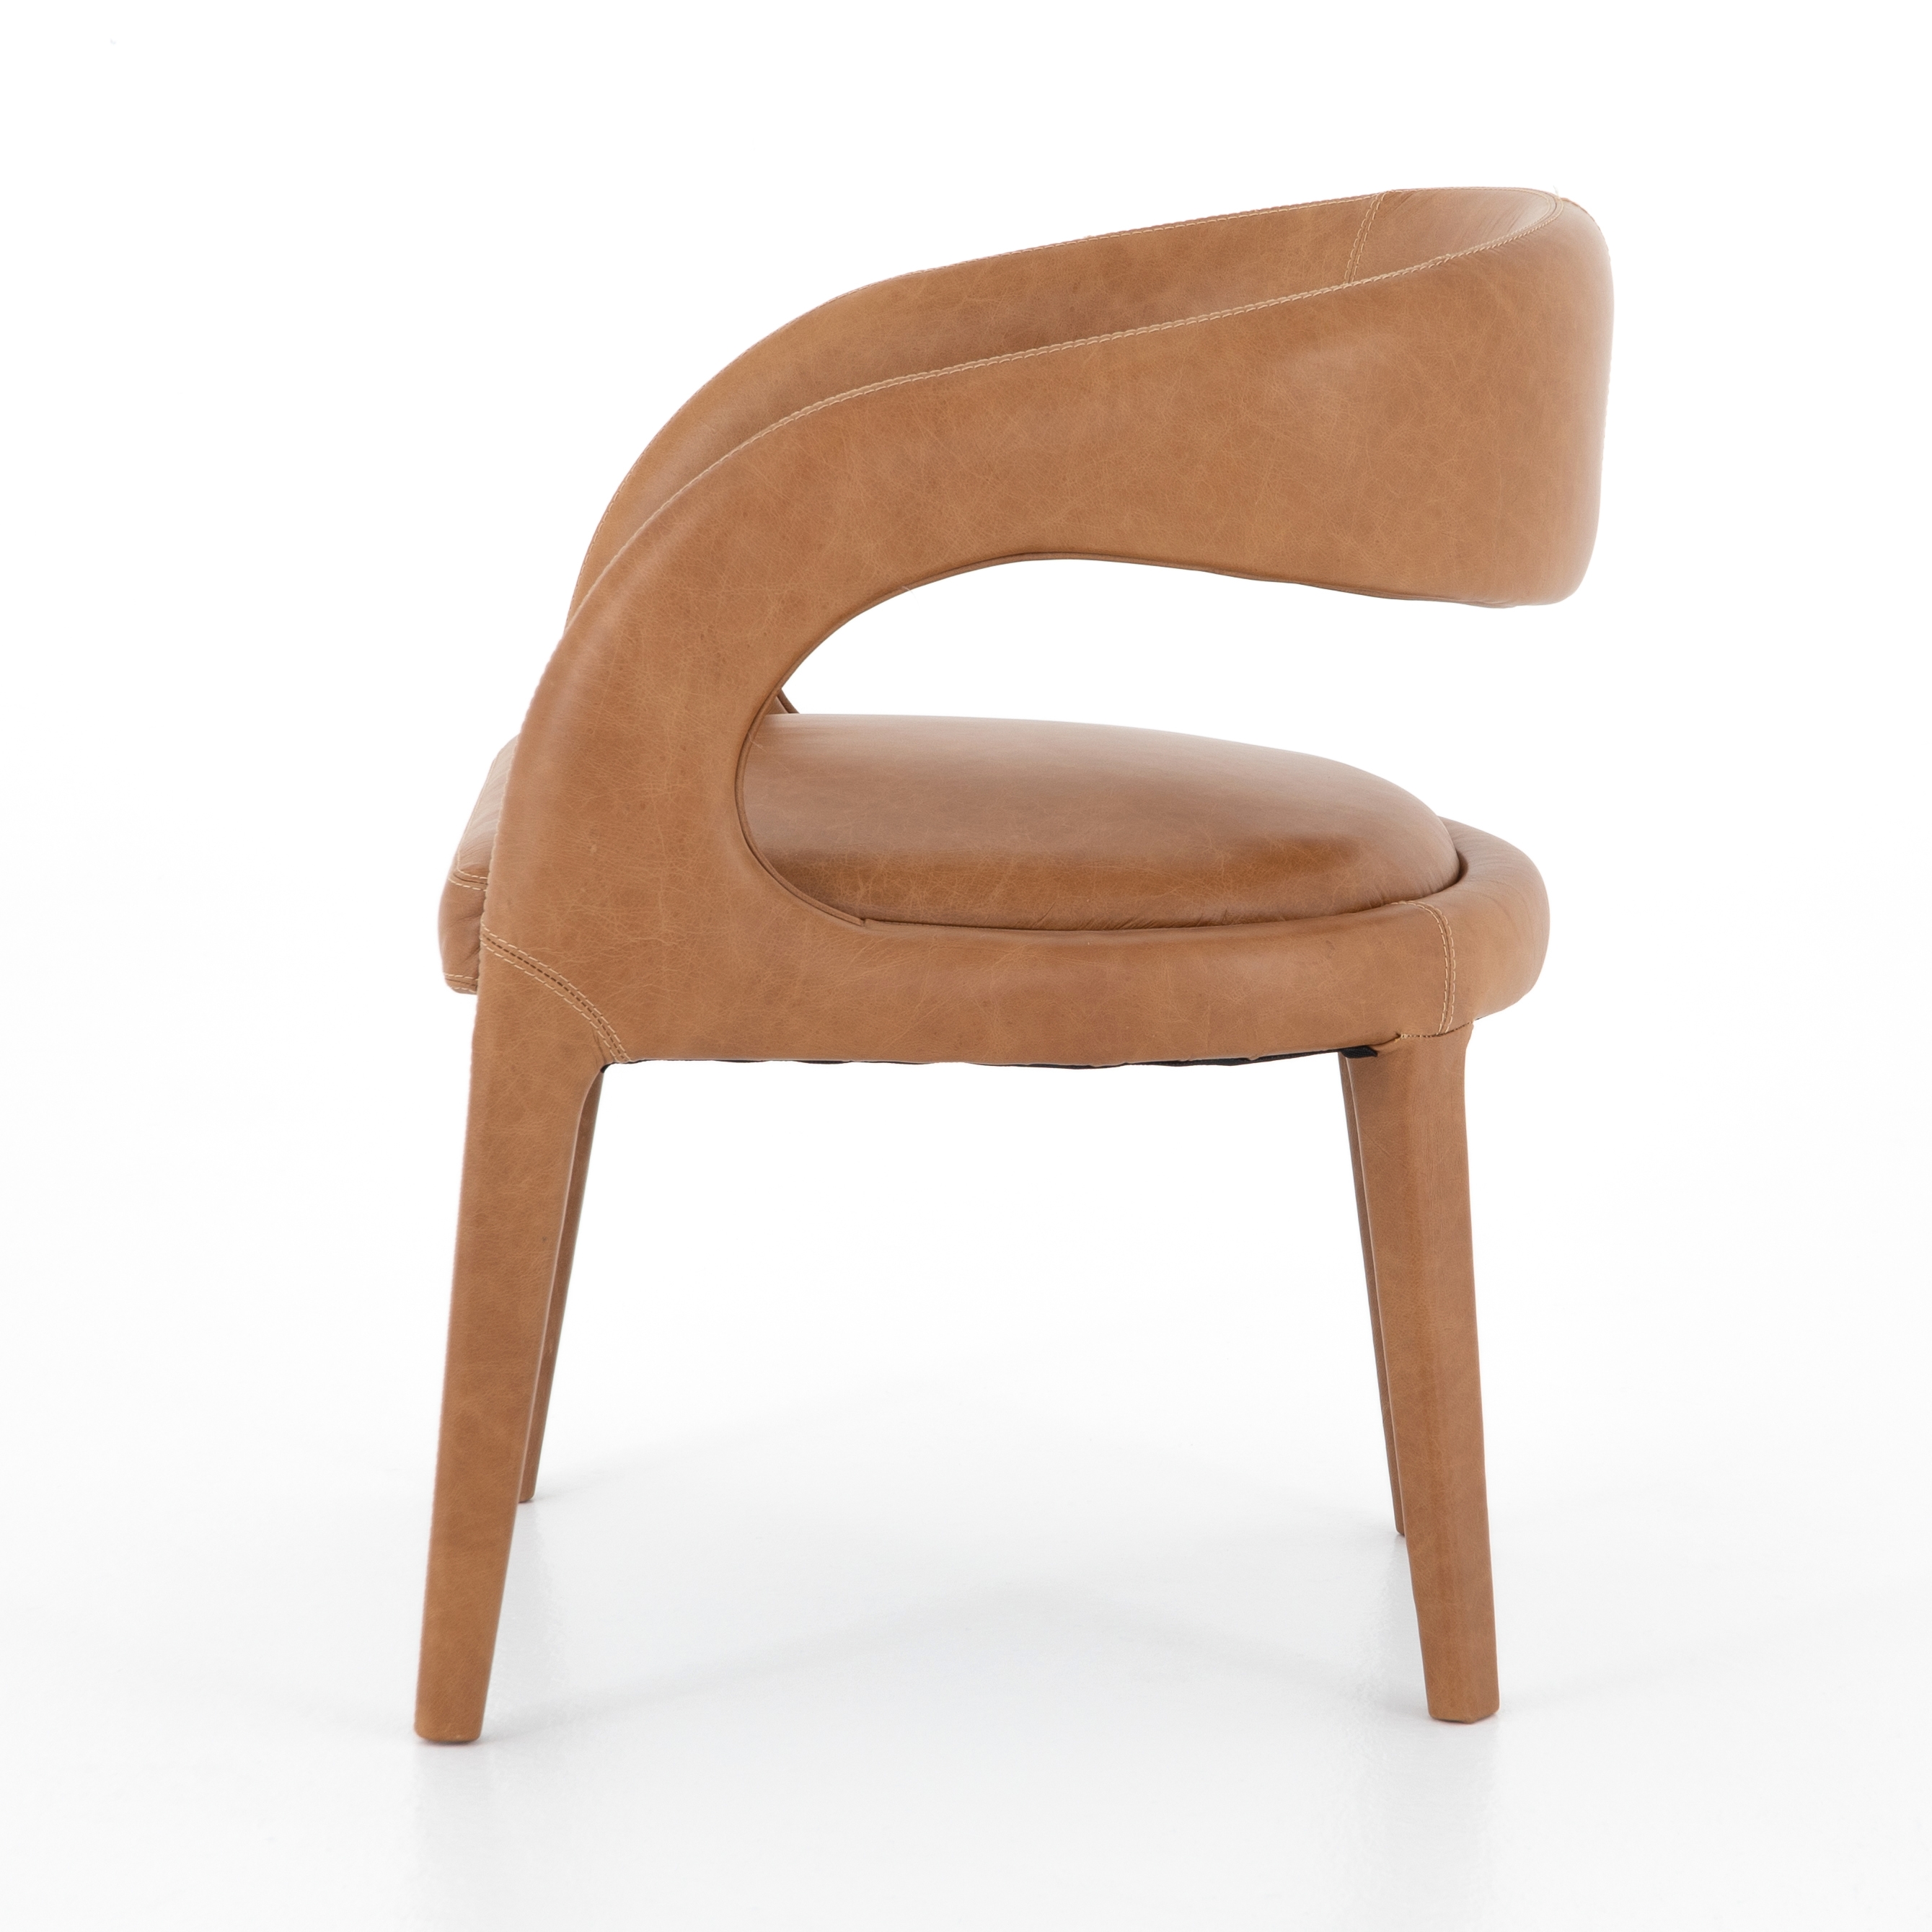 Hawkins Dining Chair-Butterscotch - Image 5